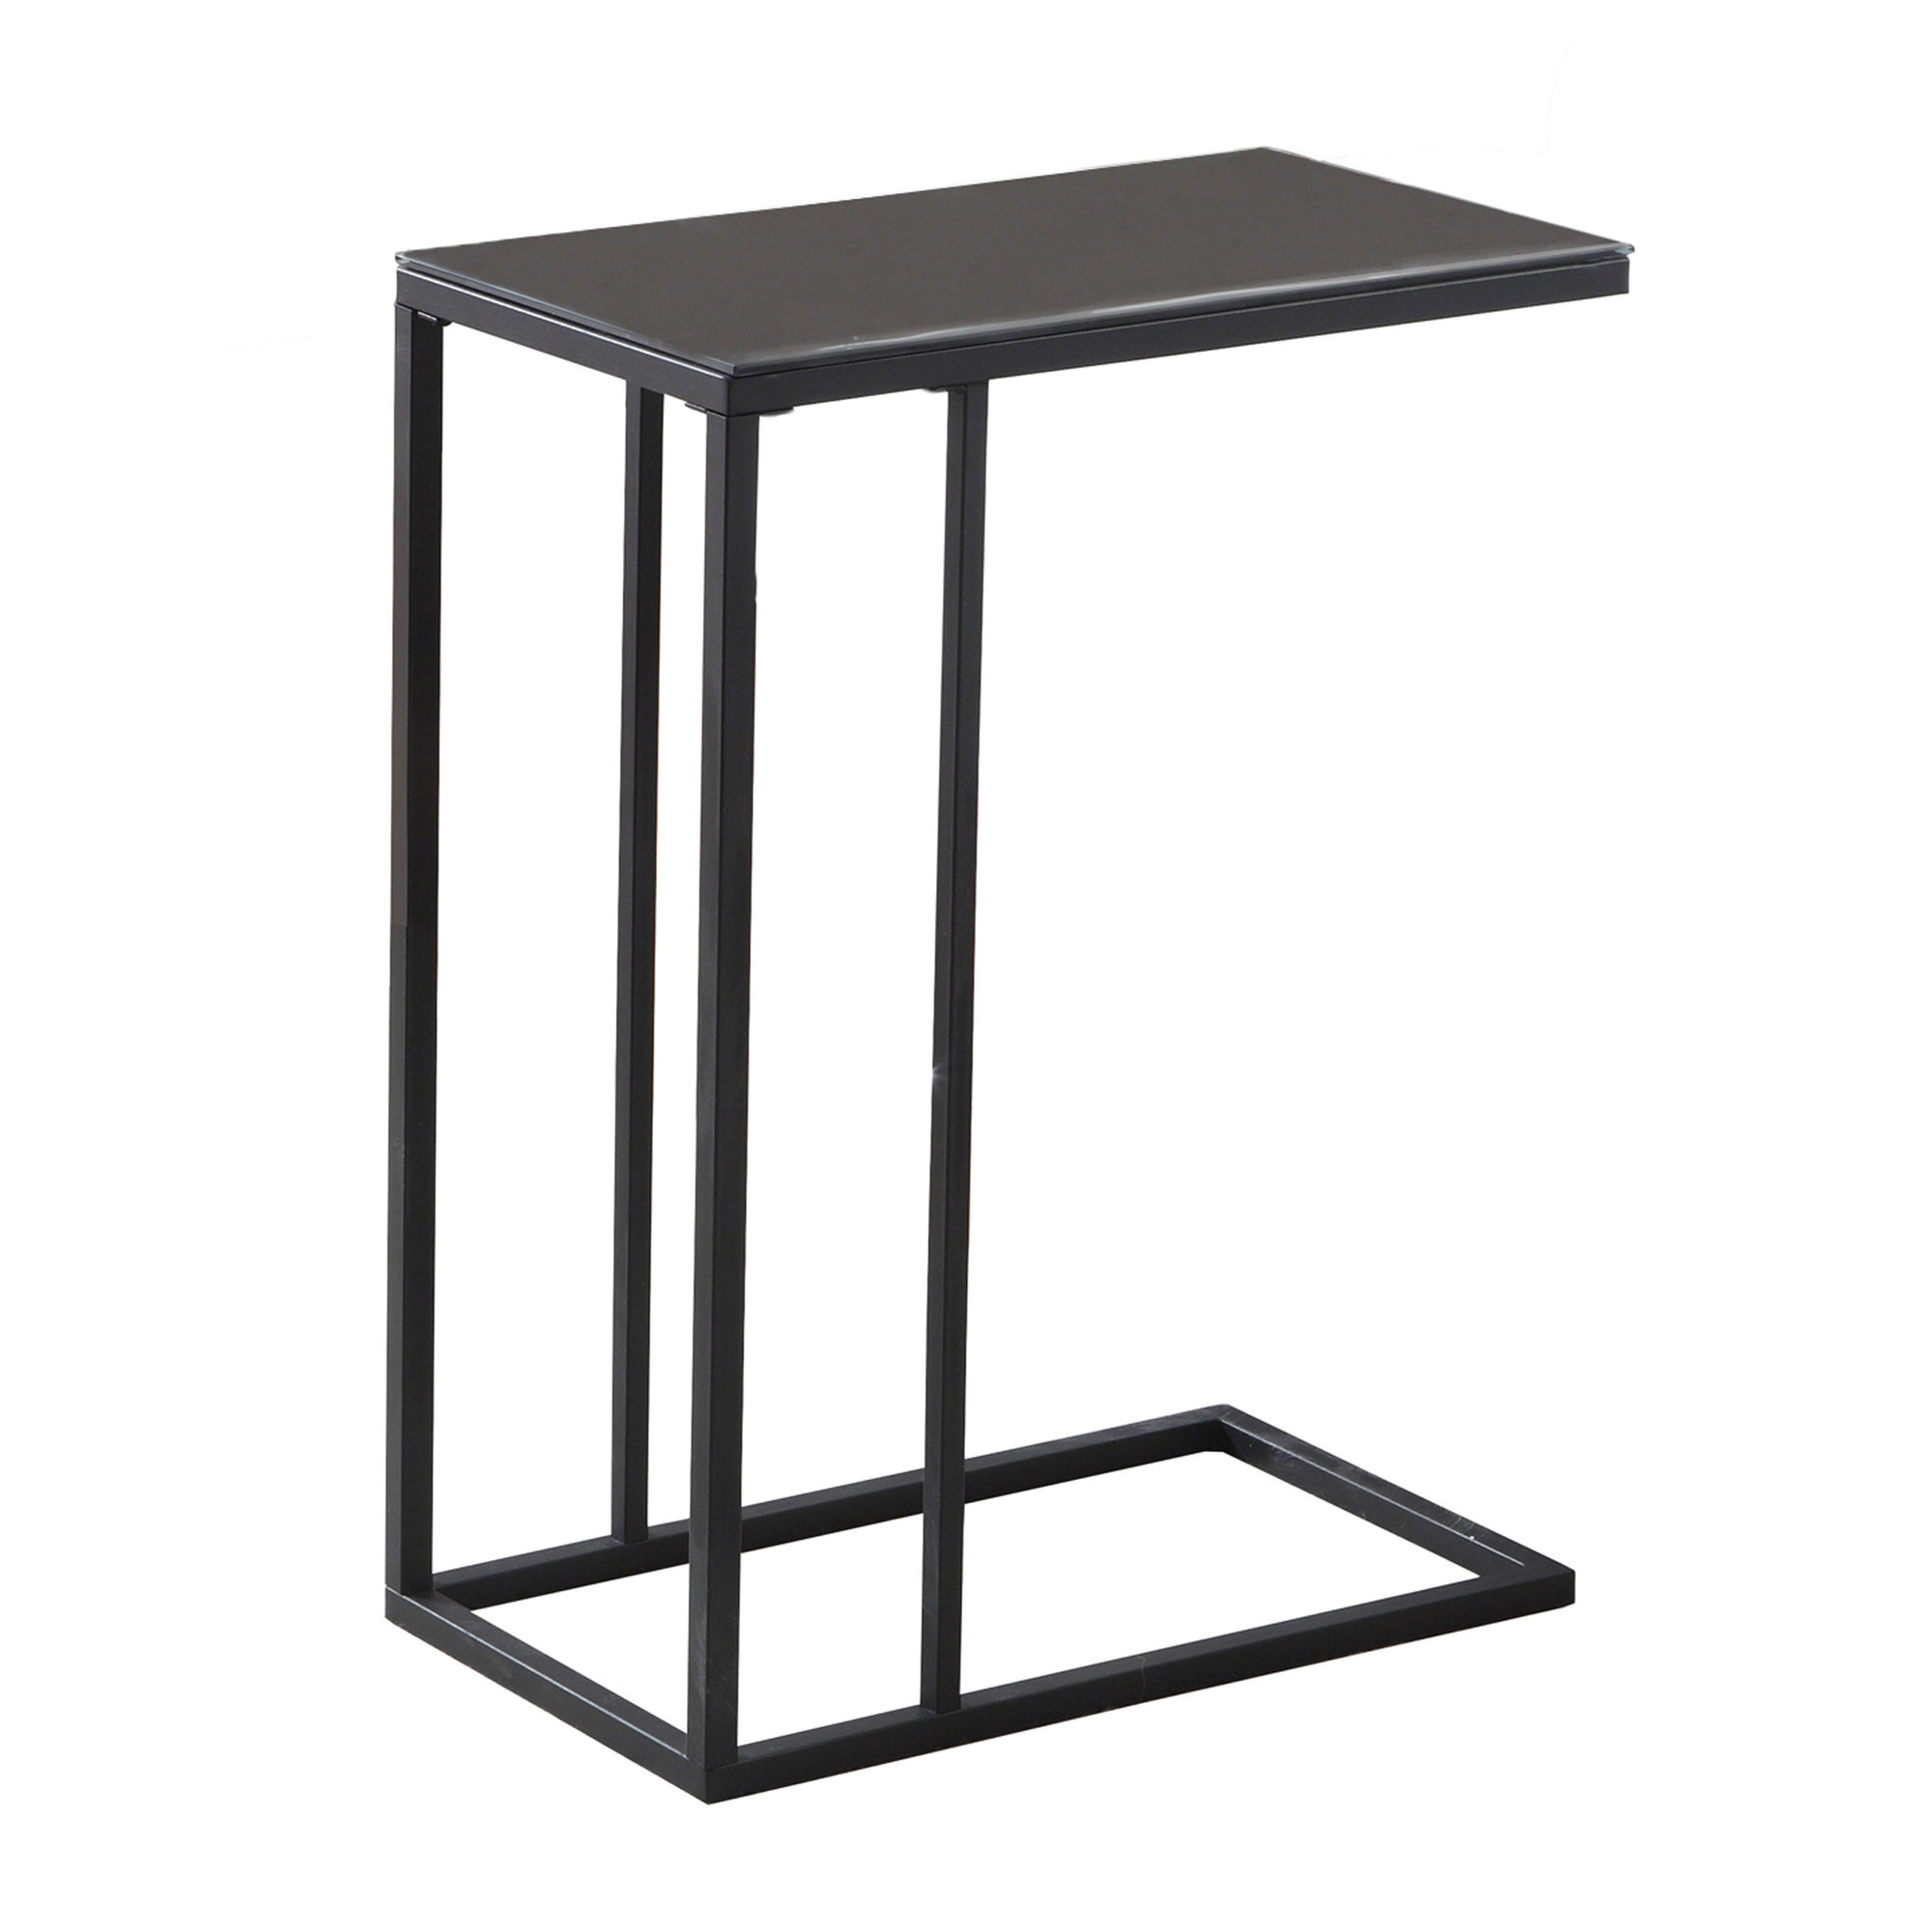 ACCENT TABLE - BLACK METAL / BLACK TEMPERED GLASS